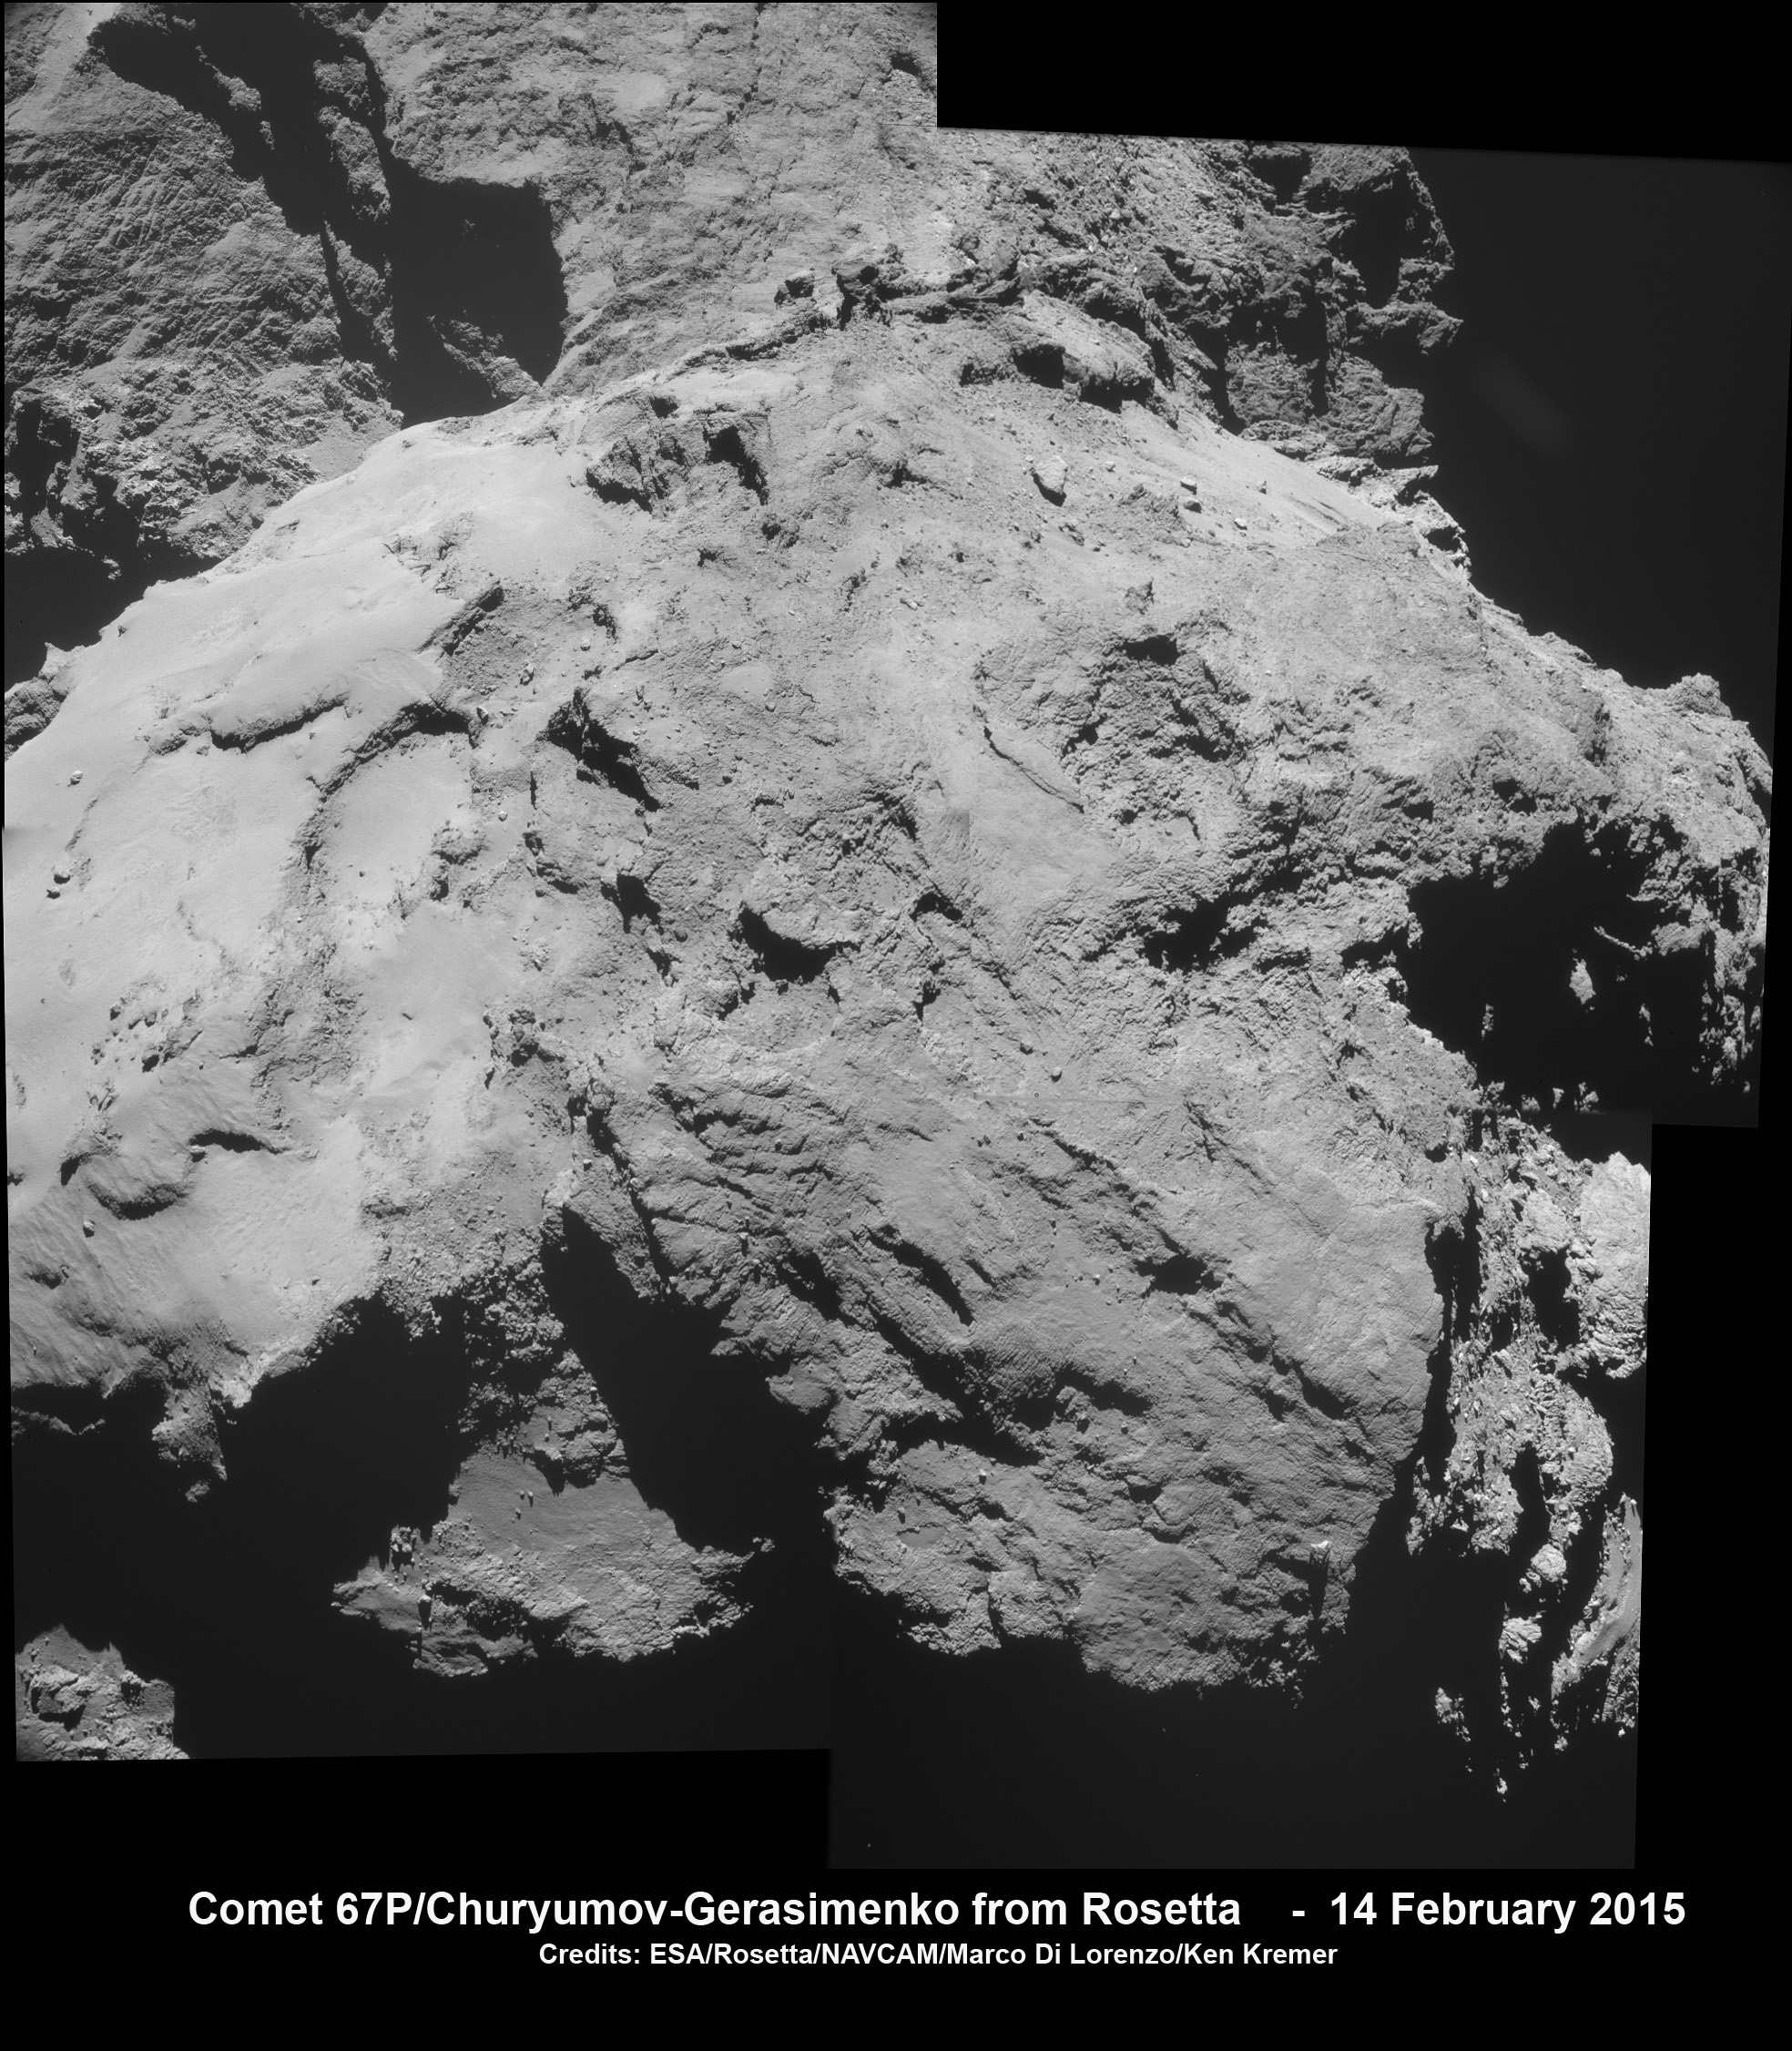 Backside view of Comet 67P/Churyumov-Gerasimenko.  Four image mosaic of Comet 67P/Churyumov-Gerasimenko comprising images taken on 14 February 2015 at 10:15 GMT just prior to closest approach from a distance of 12.6 km from the comet centre (about 10.6 km from the surface). For the comet centre distance, the image scale is 1.1 m/pixel. In this orientation the view is across the ‘back’ of the large comet lobe, with the ‘neck’ and the small comet lobe towards the top of the image.  Credits: ESA/Rosetta/NAVCAM/Marco Di Lorenzo Ken Kremer/kenkremer.com